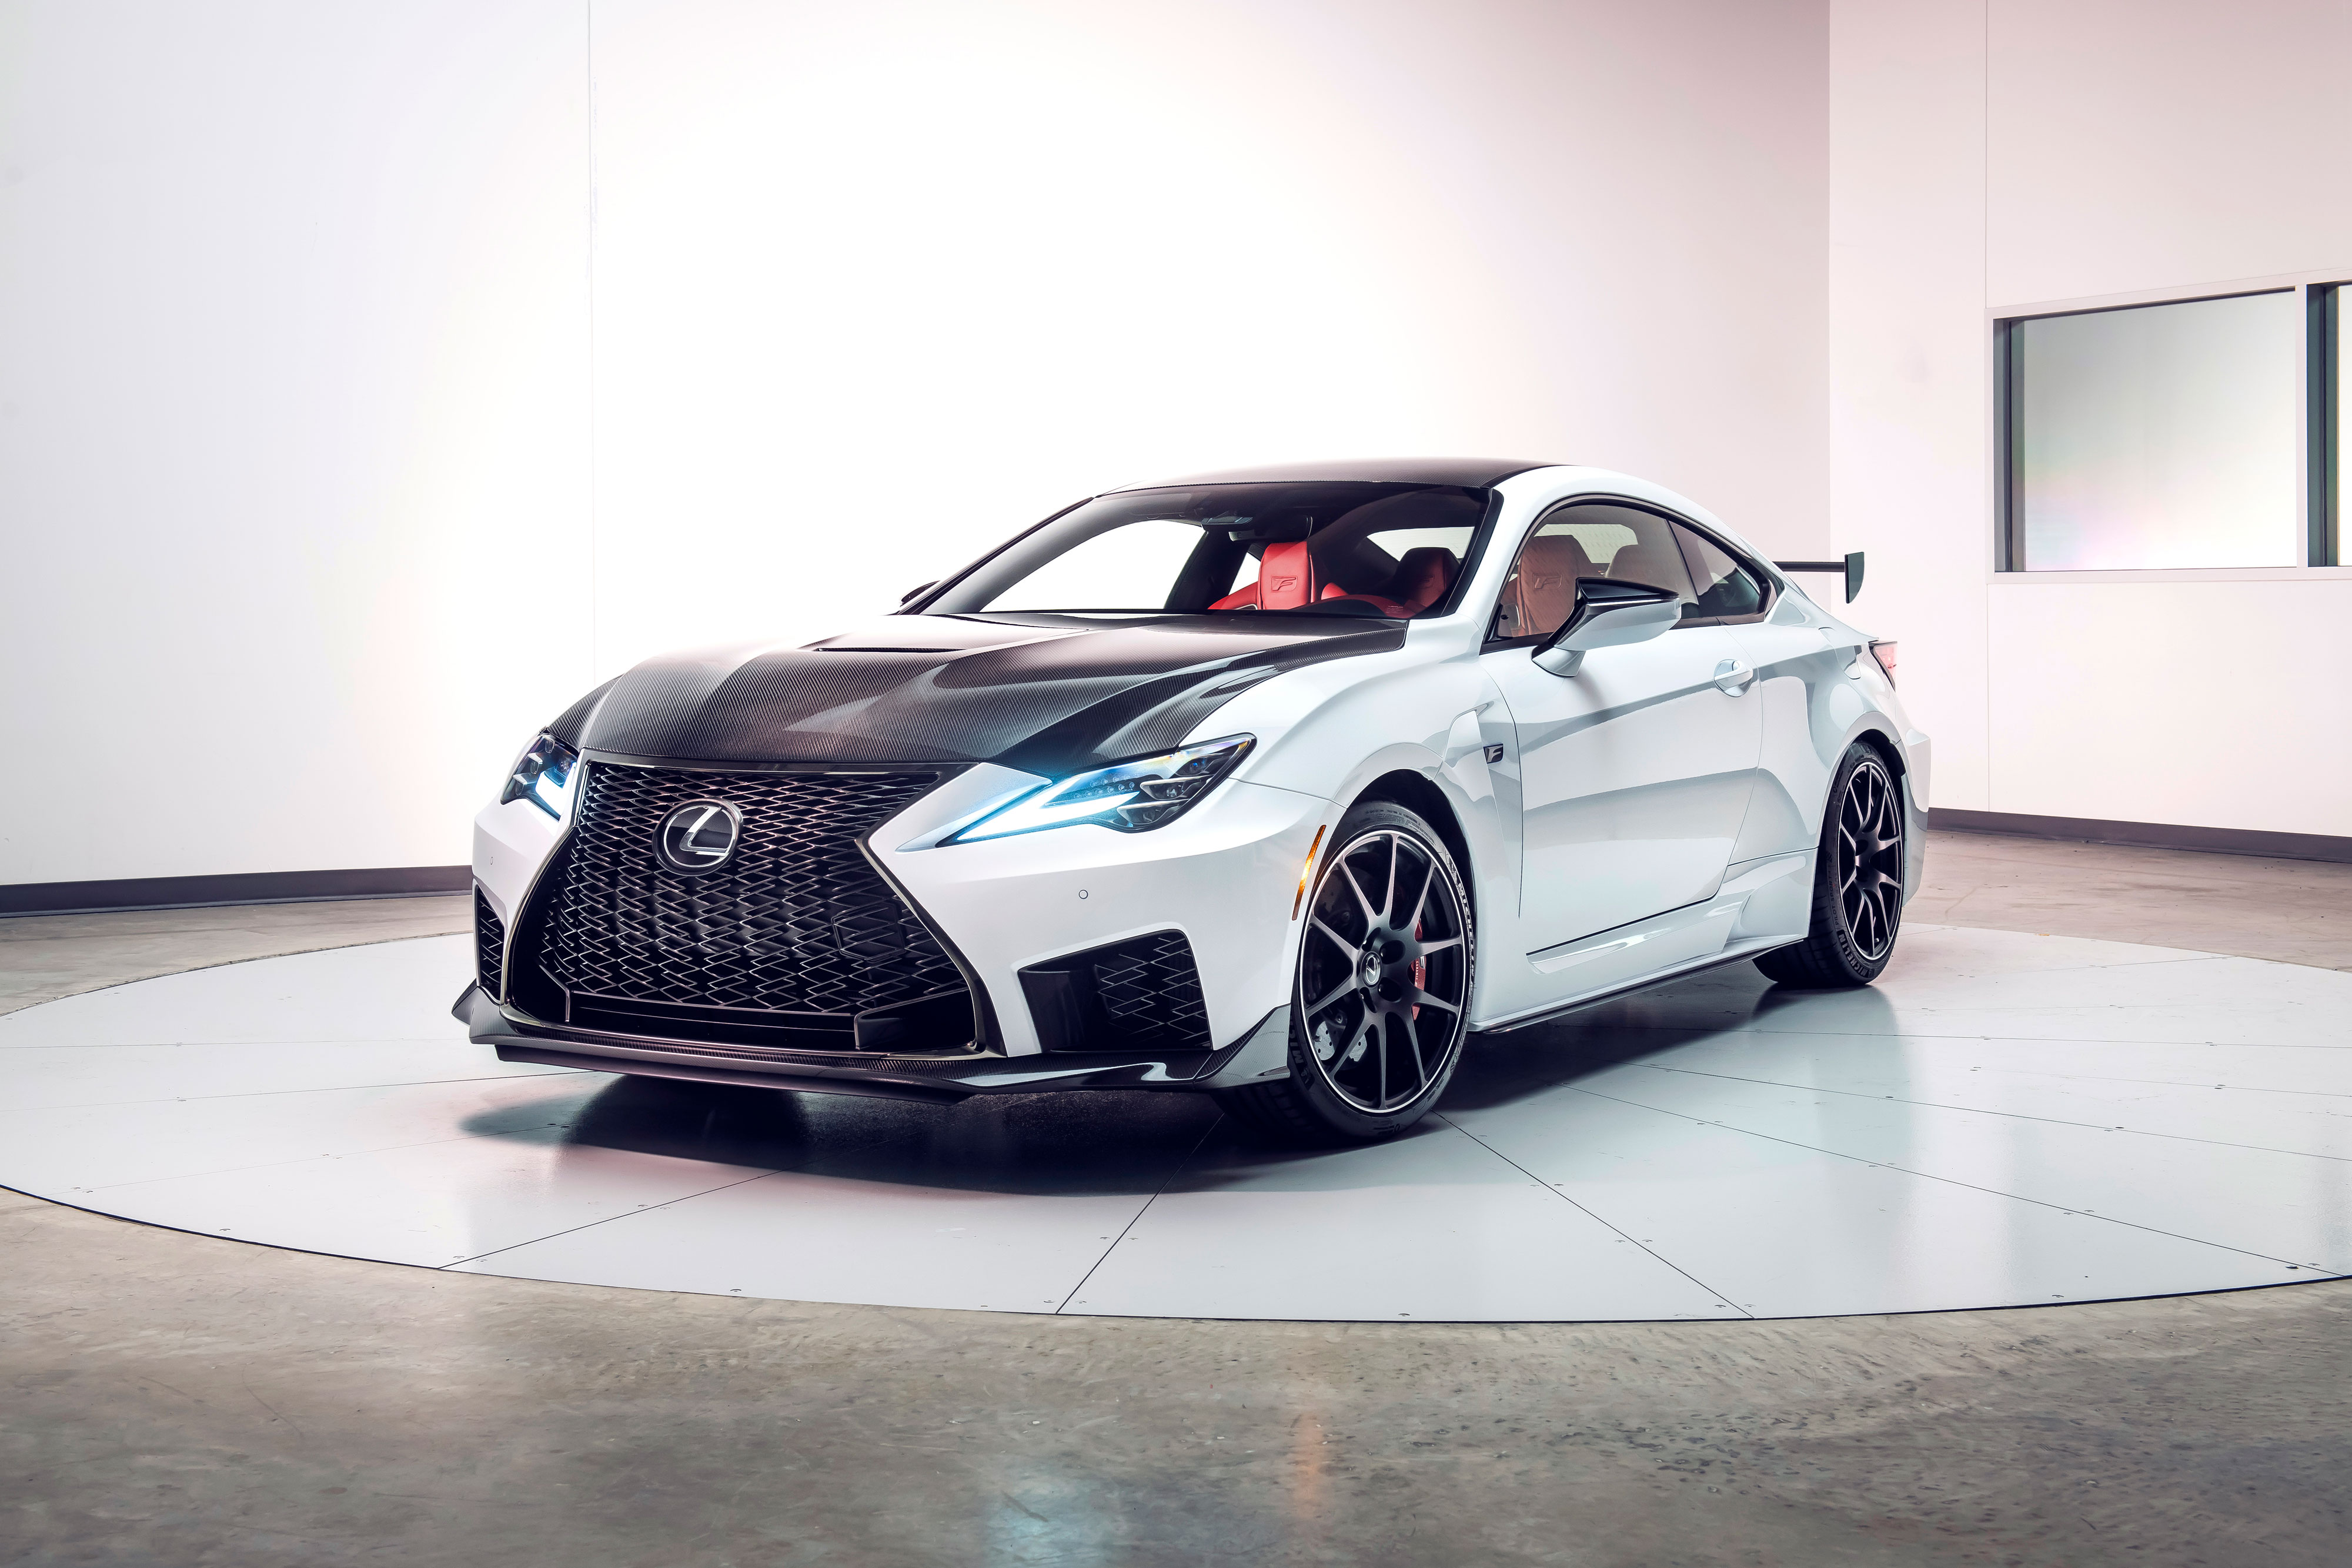 Introducing The Lexus Rc F Track Edition Updated 2020 Rc F